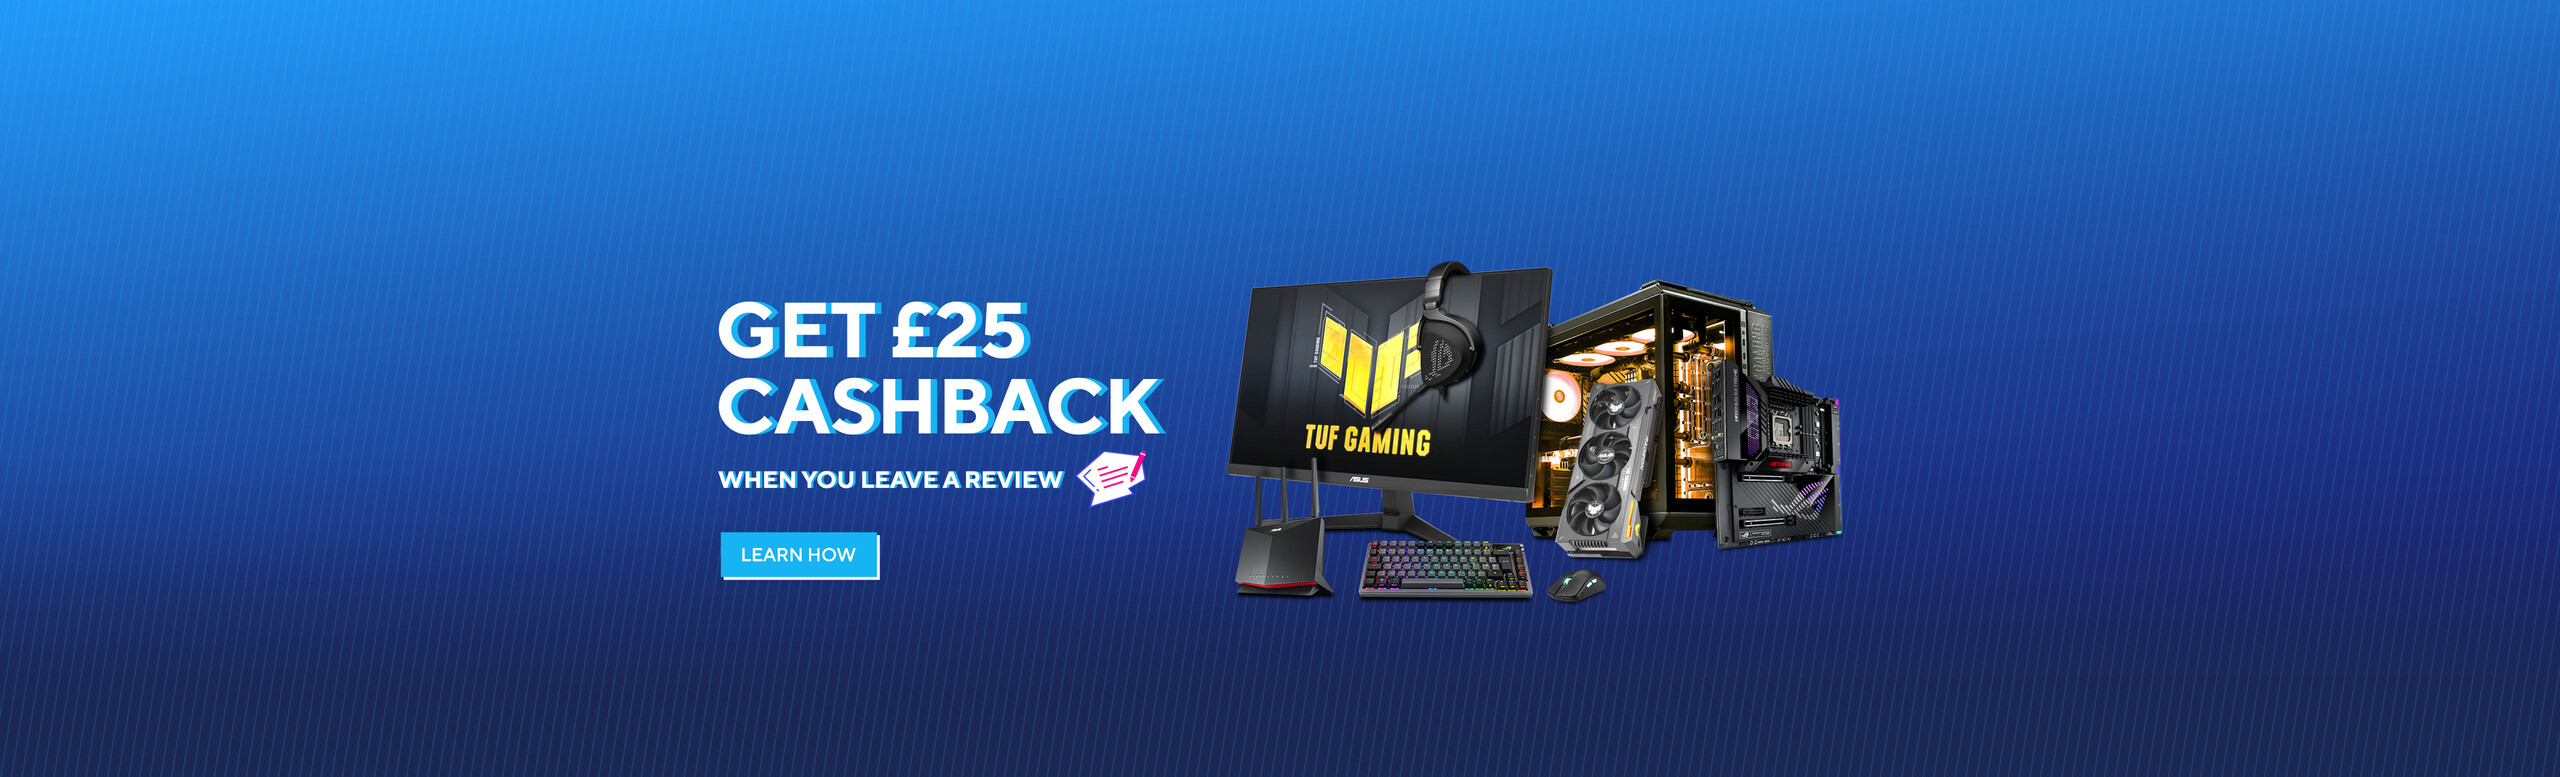 Get £25 cashback on selected PSUs with Rate My Gear